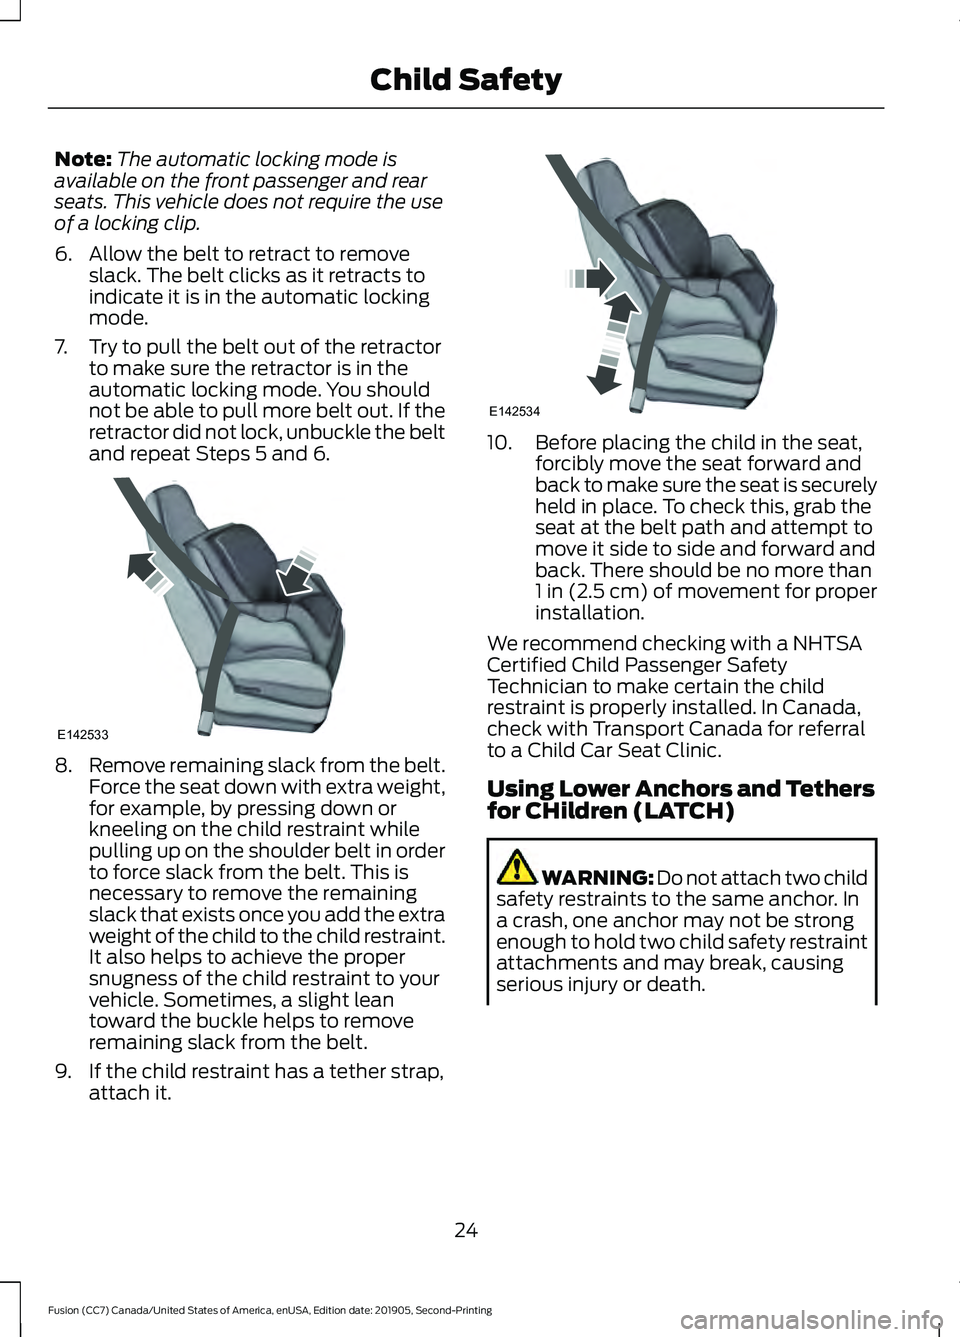 FORD FUSION 2020  Owners Manual Note:
The automatic locking mode is
available on the front passenger and rear
seats. This vehicle does not require the use
of a locking clip.
6. Allow the belt to retract to remove slack. The belt cli